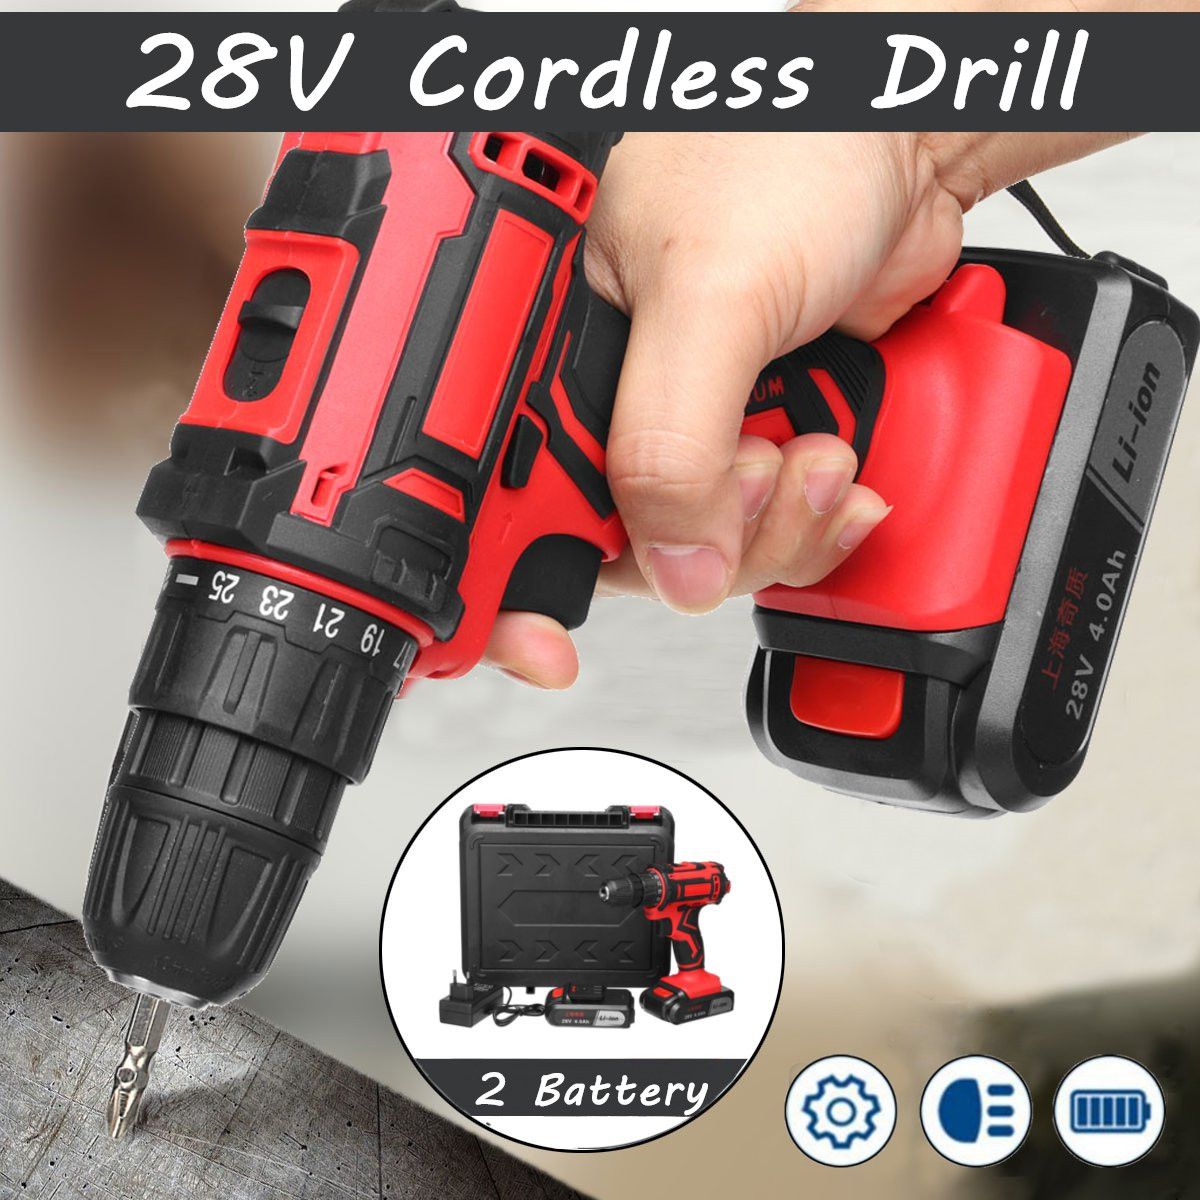 251-Torque-Stage-28V-Cordless-Drill-Rechargeable-4000mAh-Lithium-Power-Drills-38-Inch-Chuck-1399683